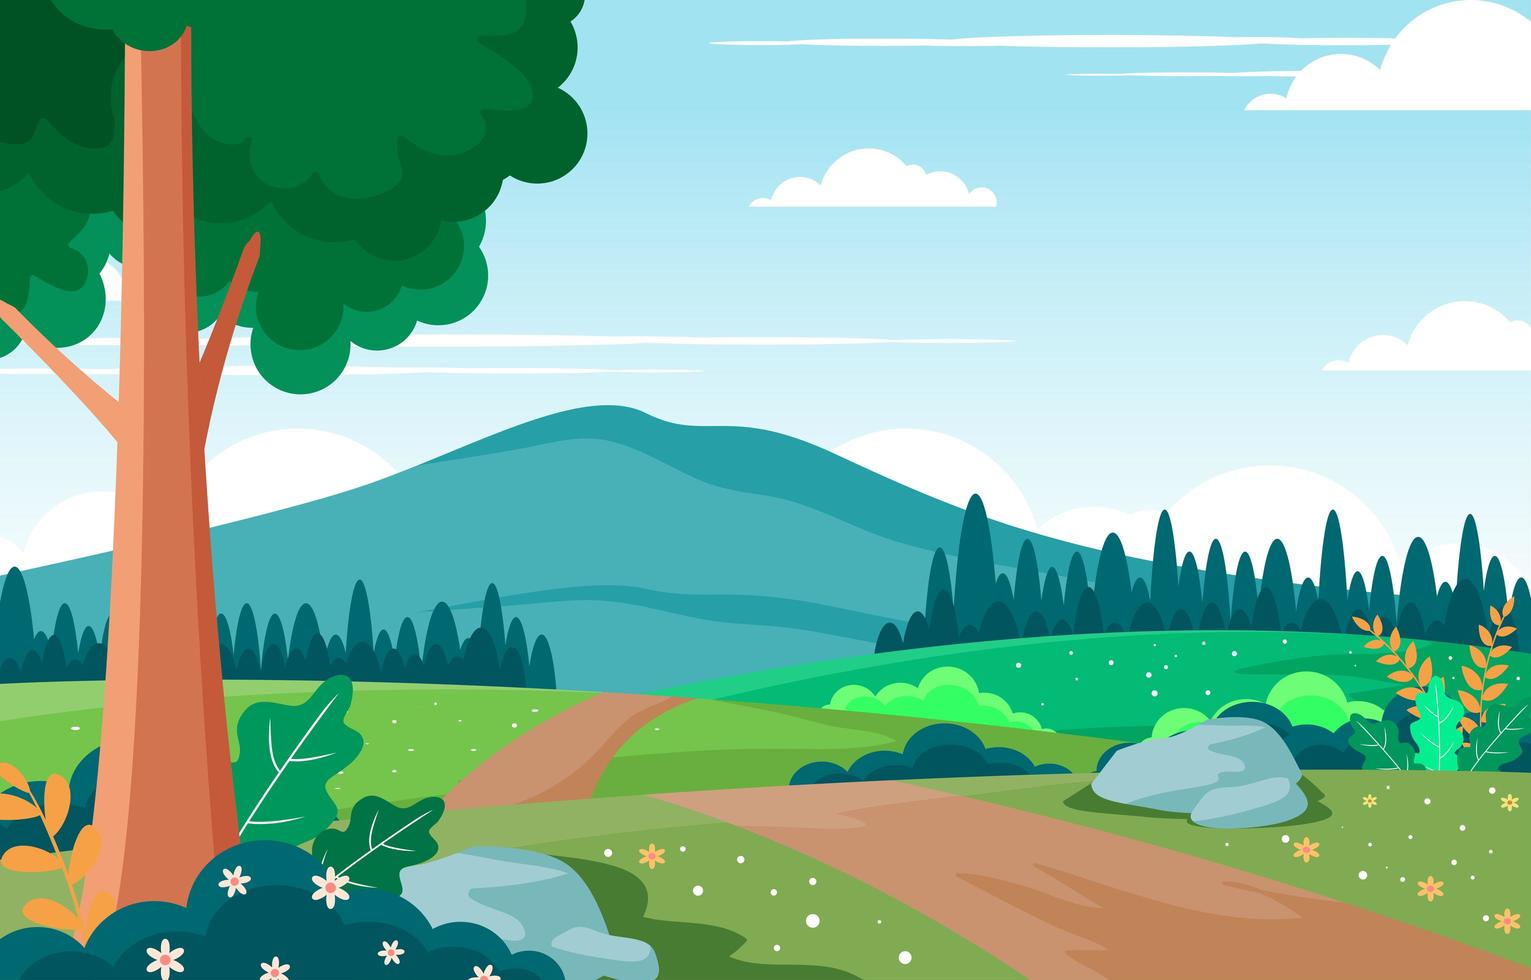 Beauty Nature Spring With Landscape Illustration vector